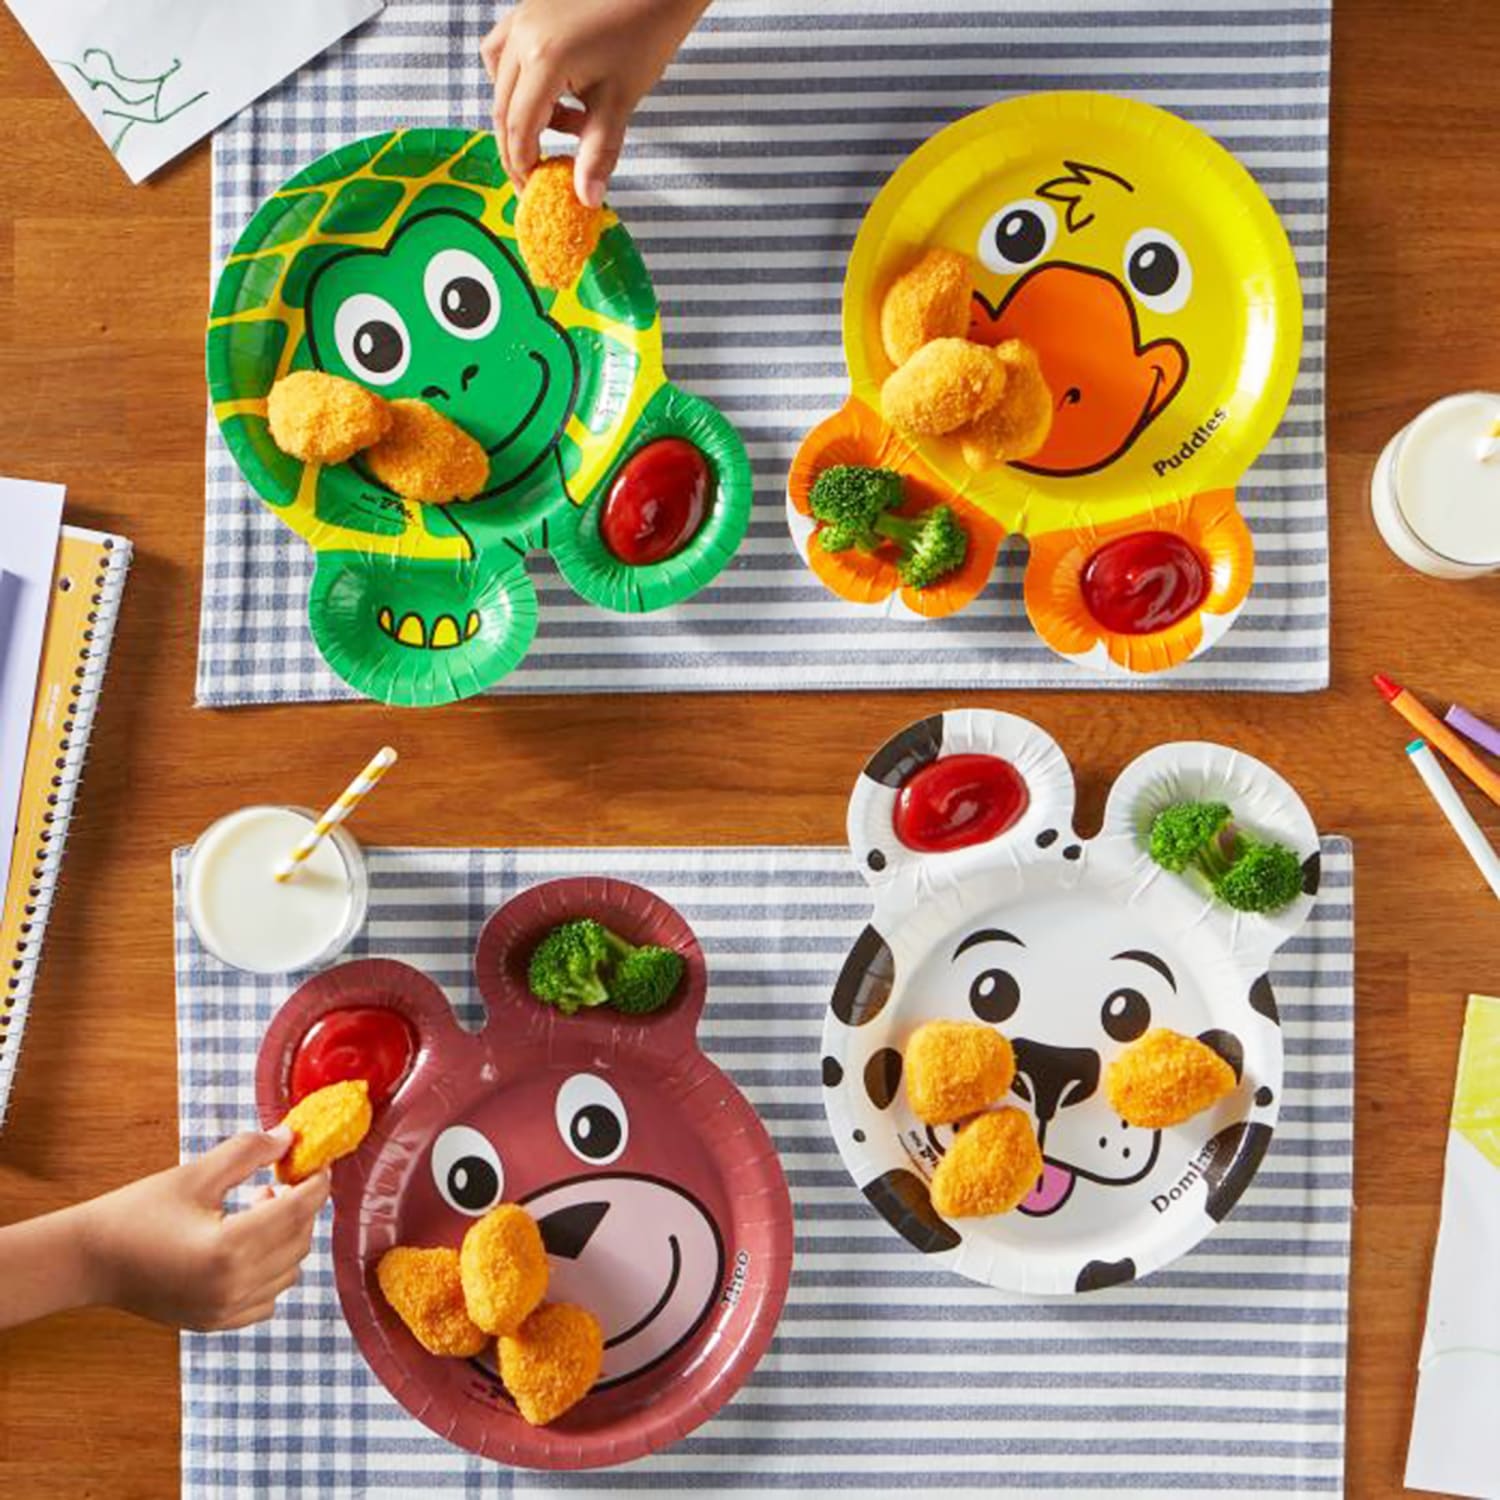 Zoo Pals Plates Are Coming Back to Feed Your Inner Child